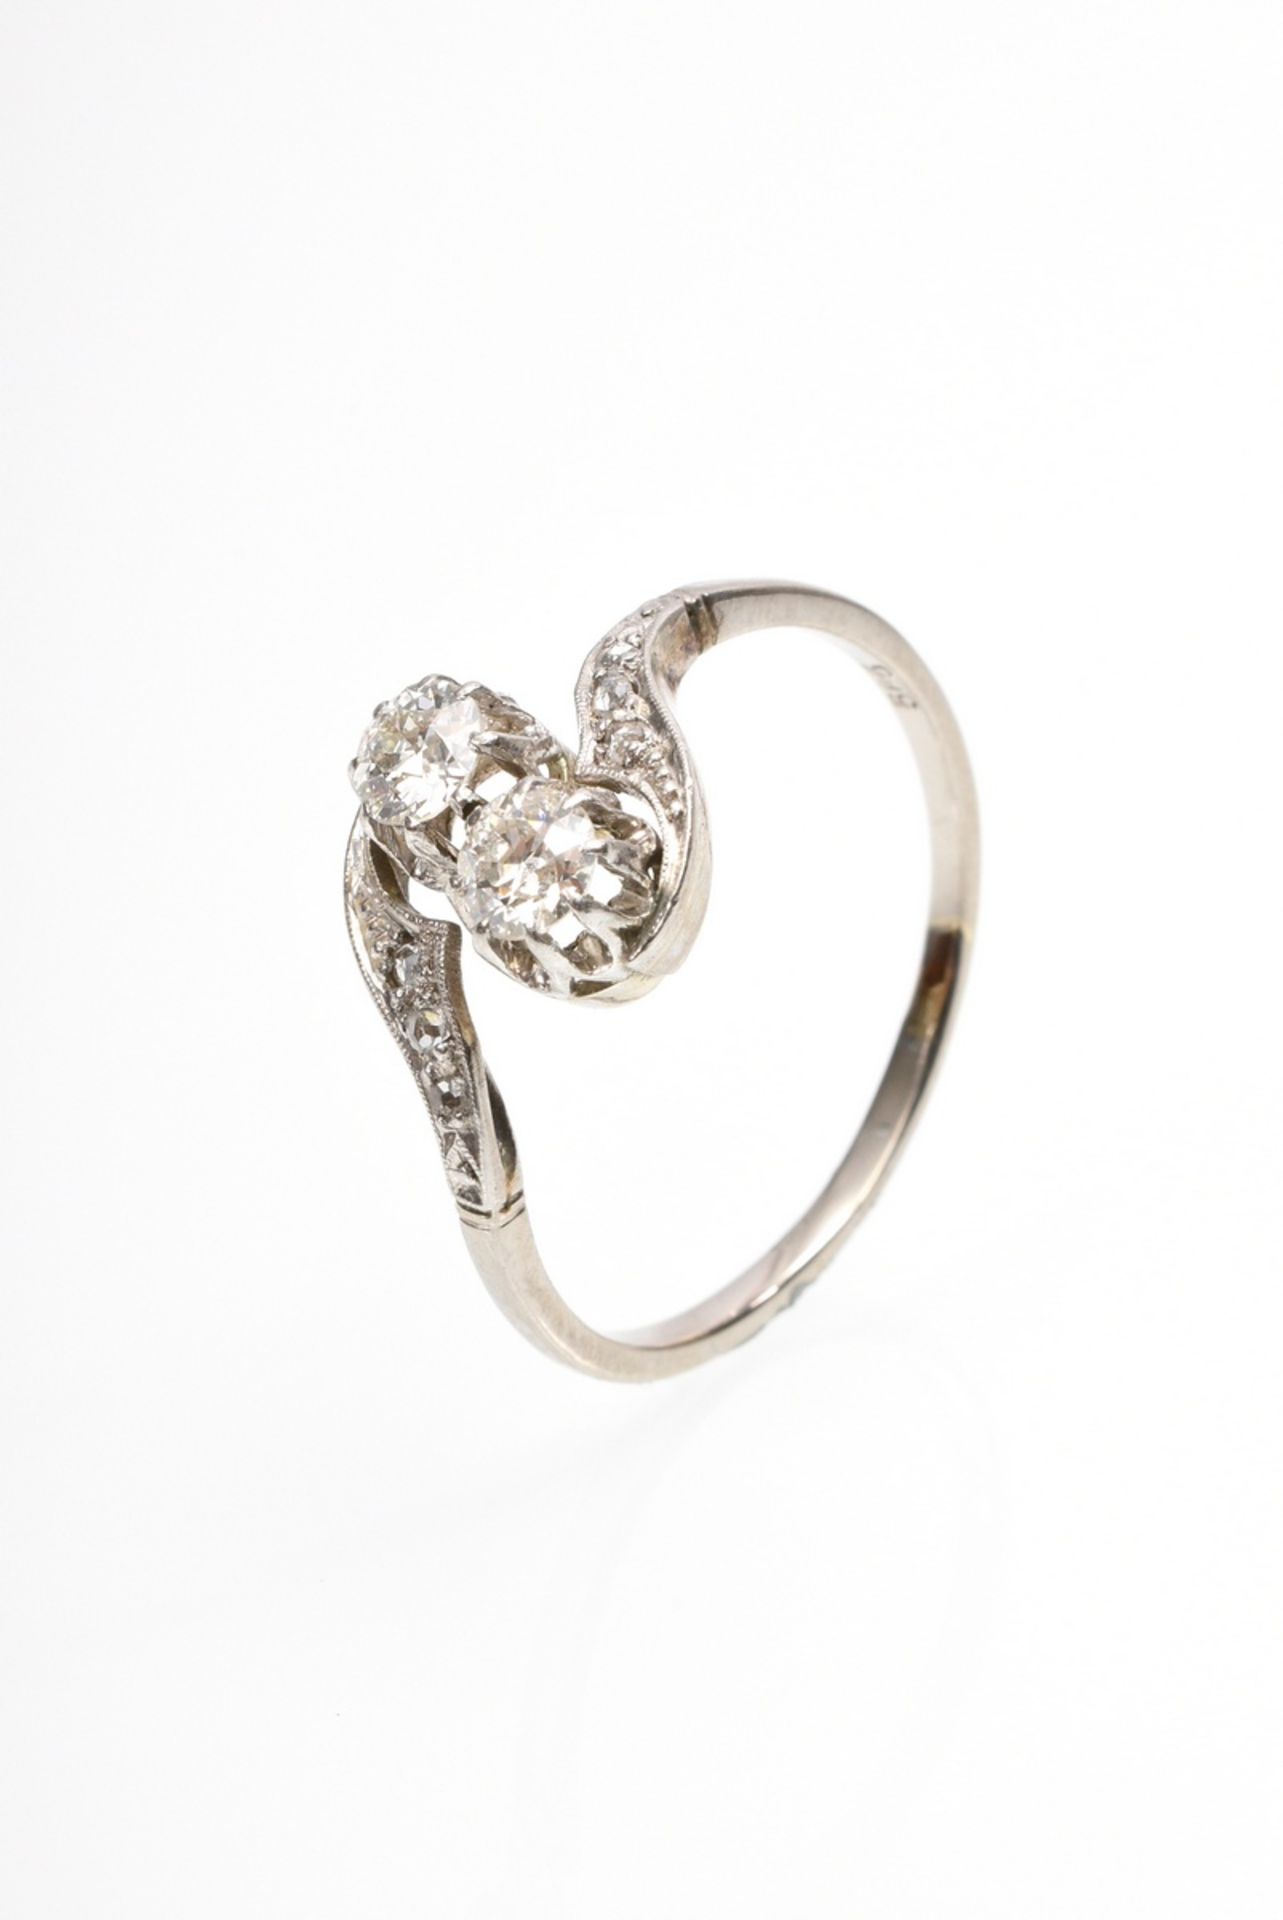 Art Deco white gold 585 "Toi et moi" ring with 2 old cut diamonds (together approx. 0.20ct/SI-P1/TC